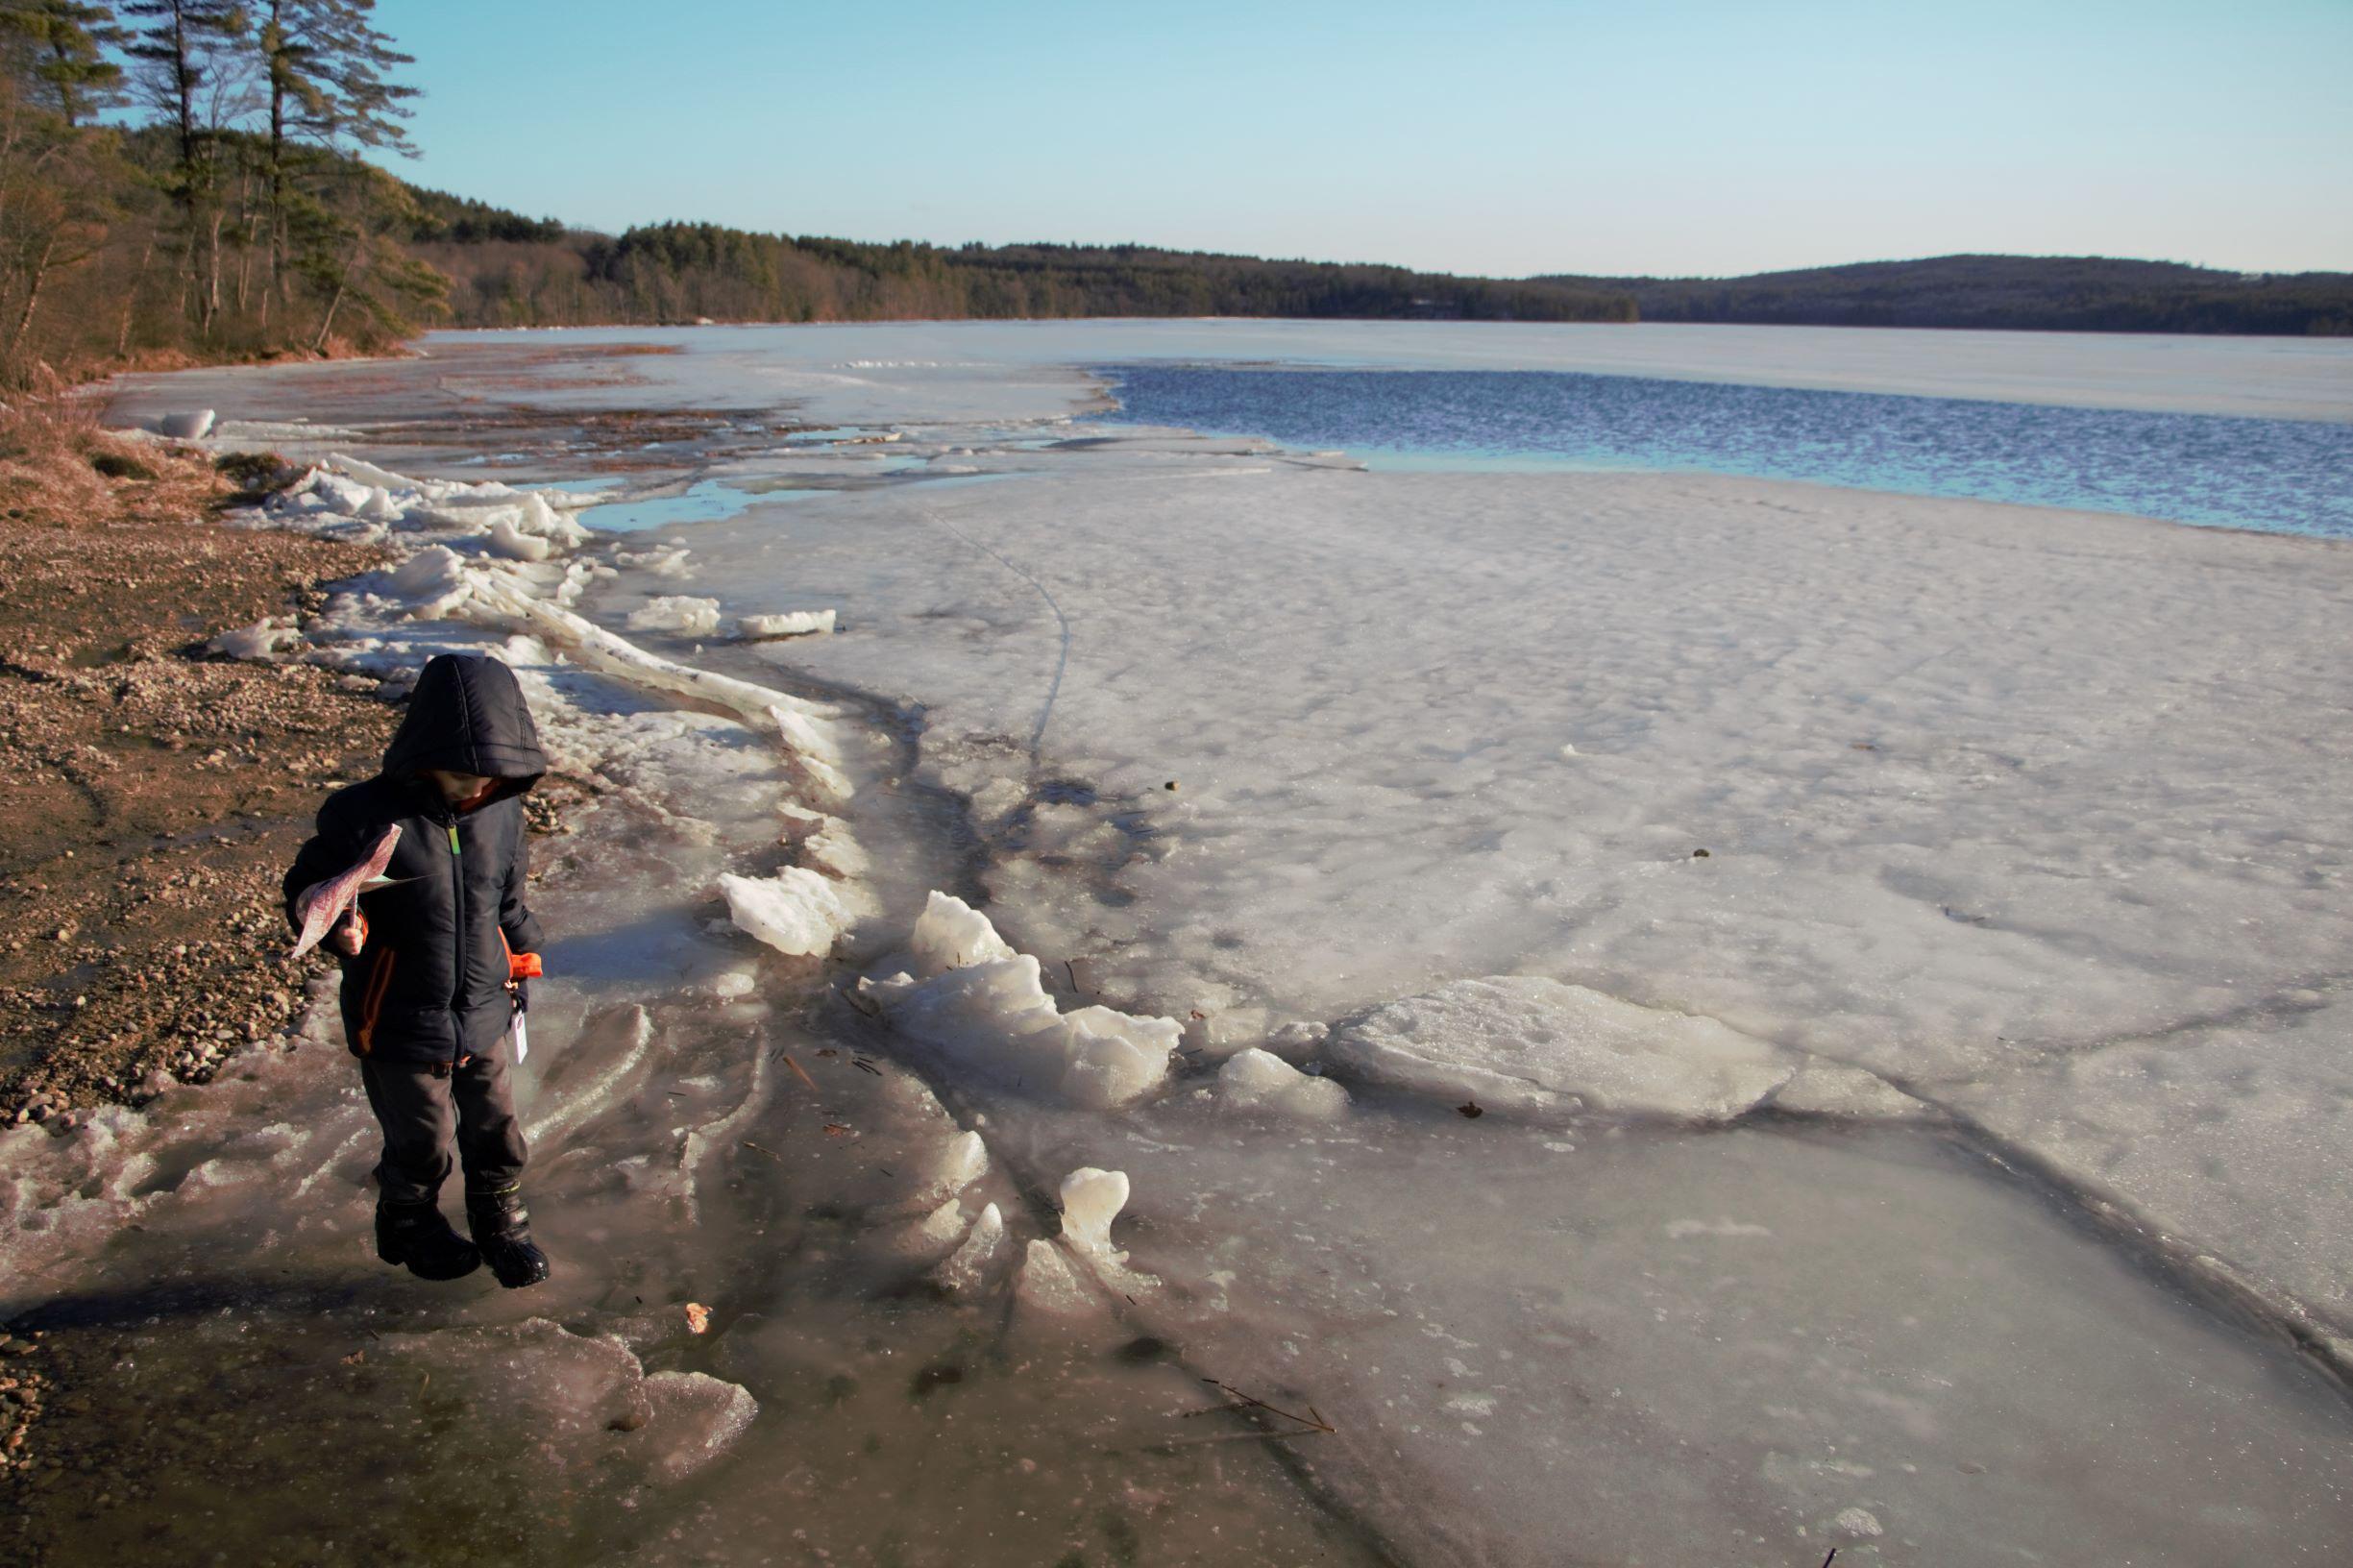 A boy in snow boots stands near an icy lake holding a pinwheel.